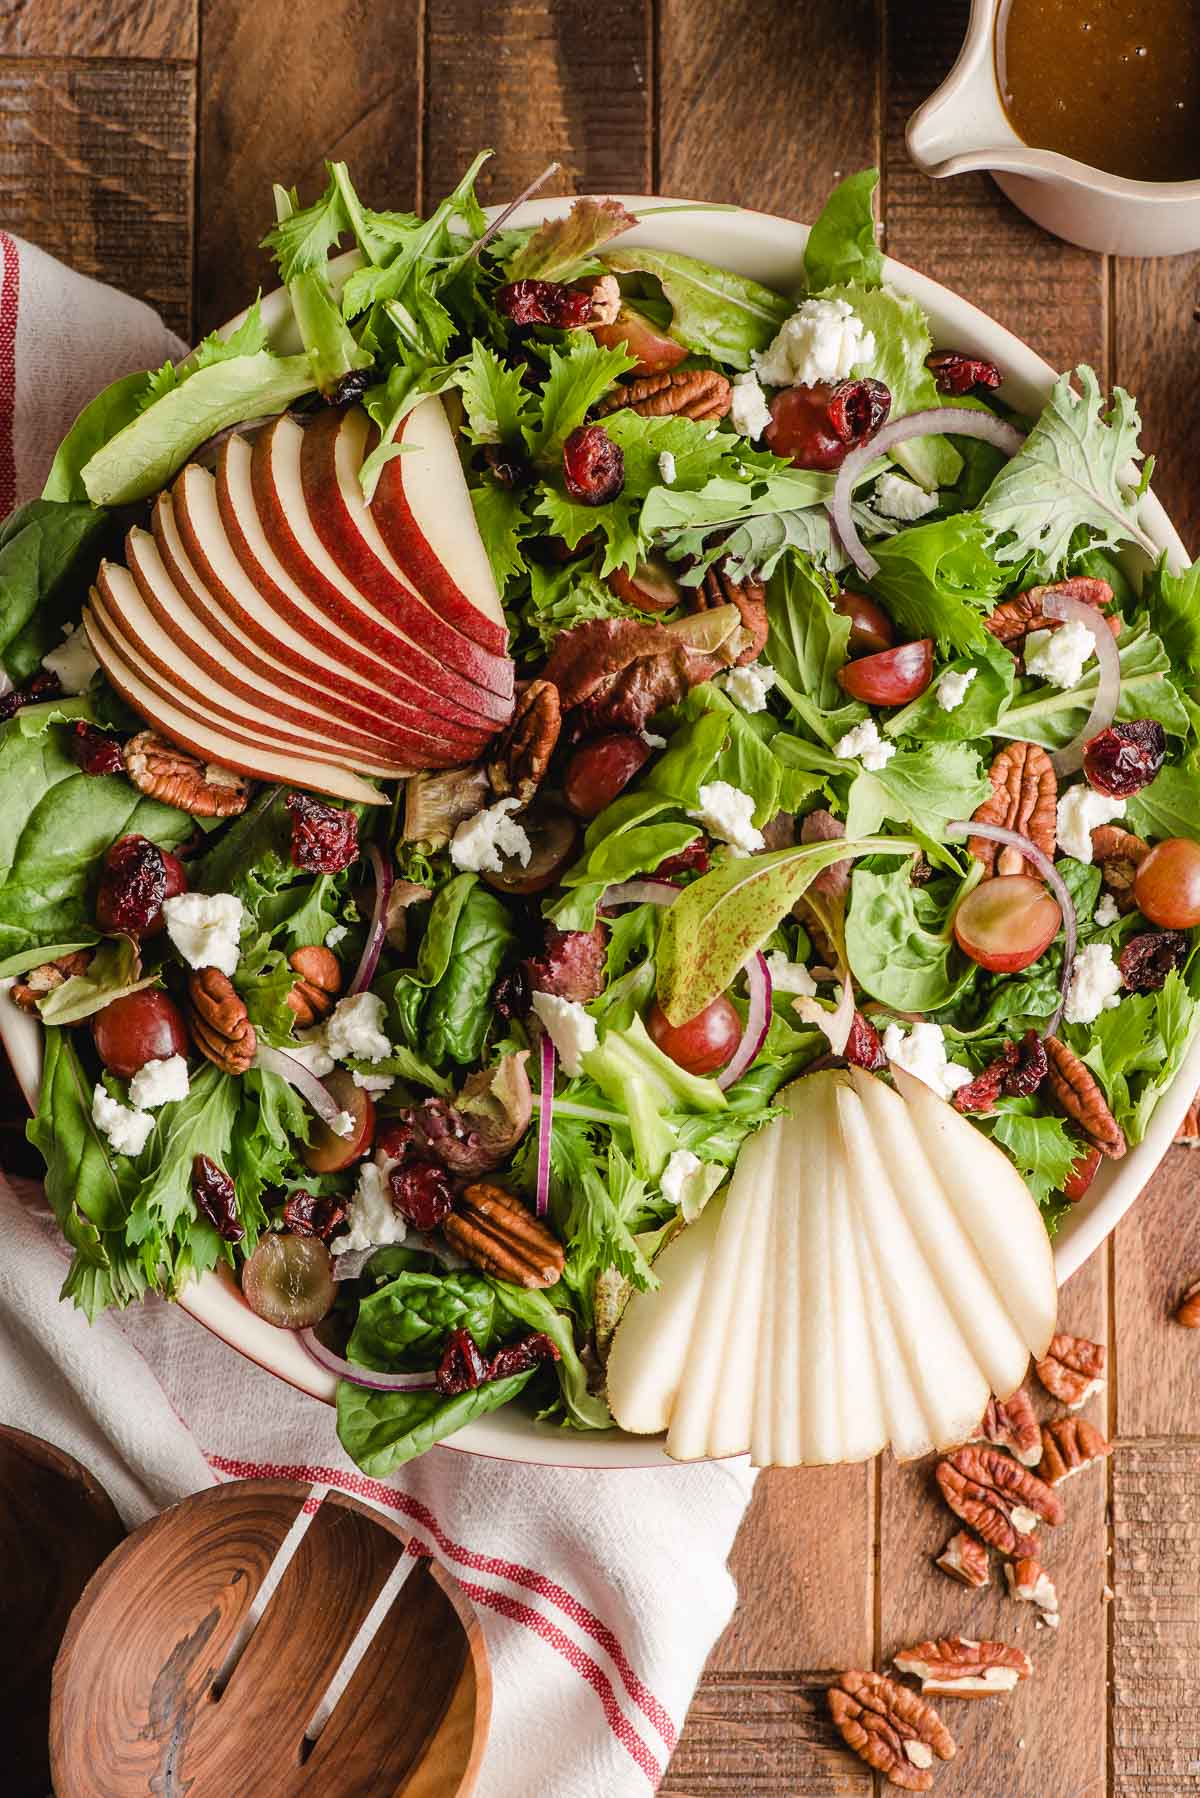 Large bowl with a mixed green salad, sliced pears, cranberries, and goat cheese.